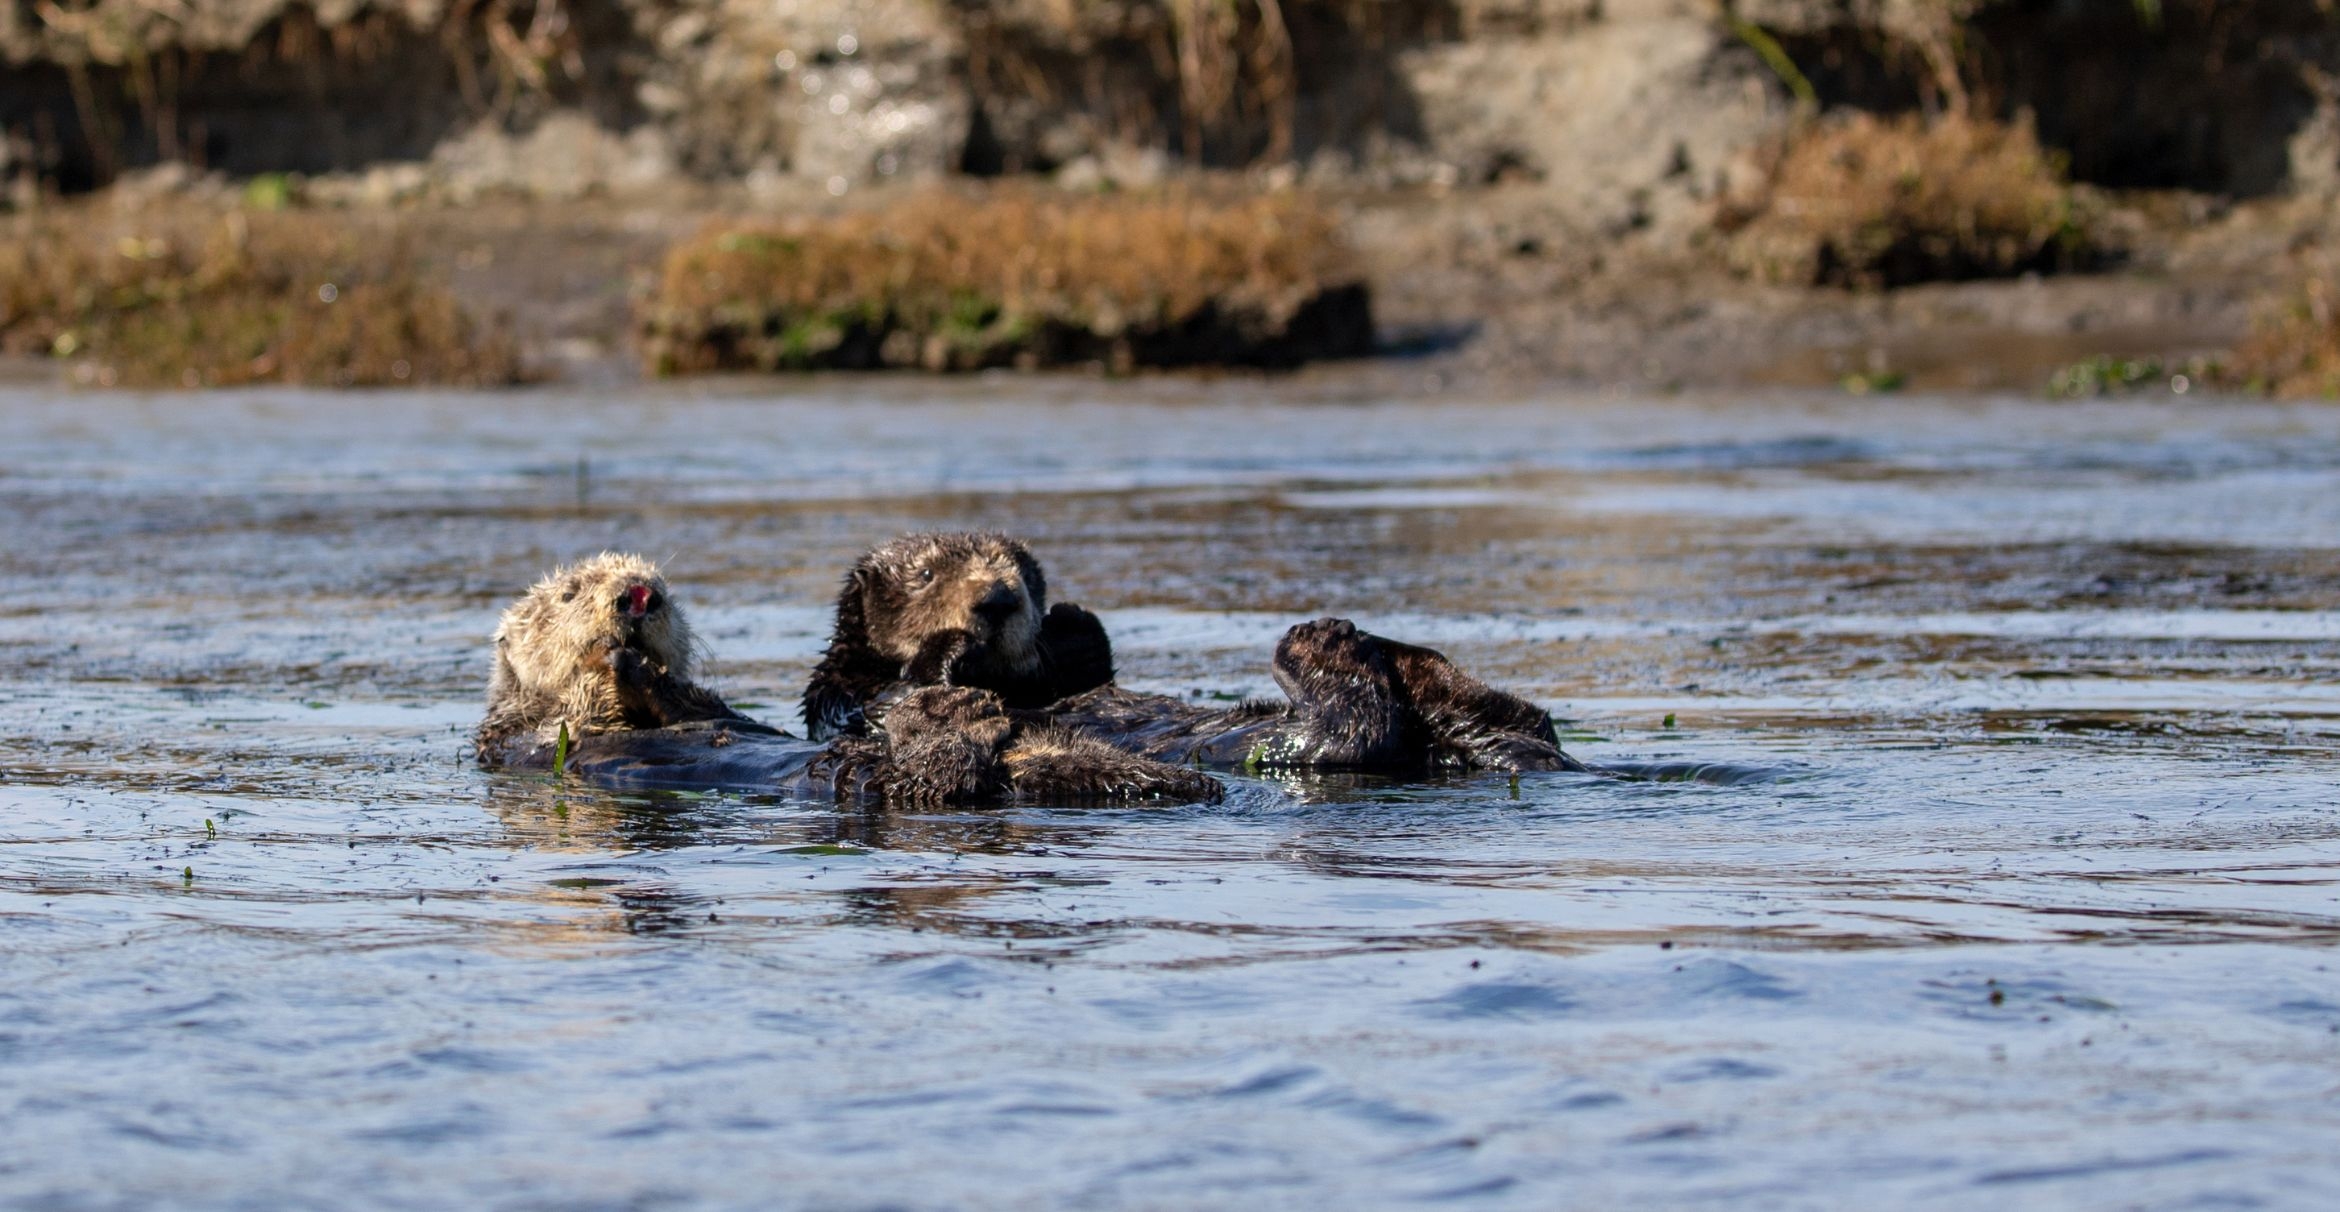 California Sea Otters grooming themselves in the Elkhorn Slough at Moss Landing.